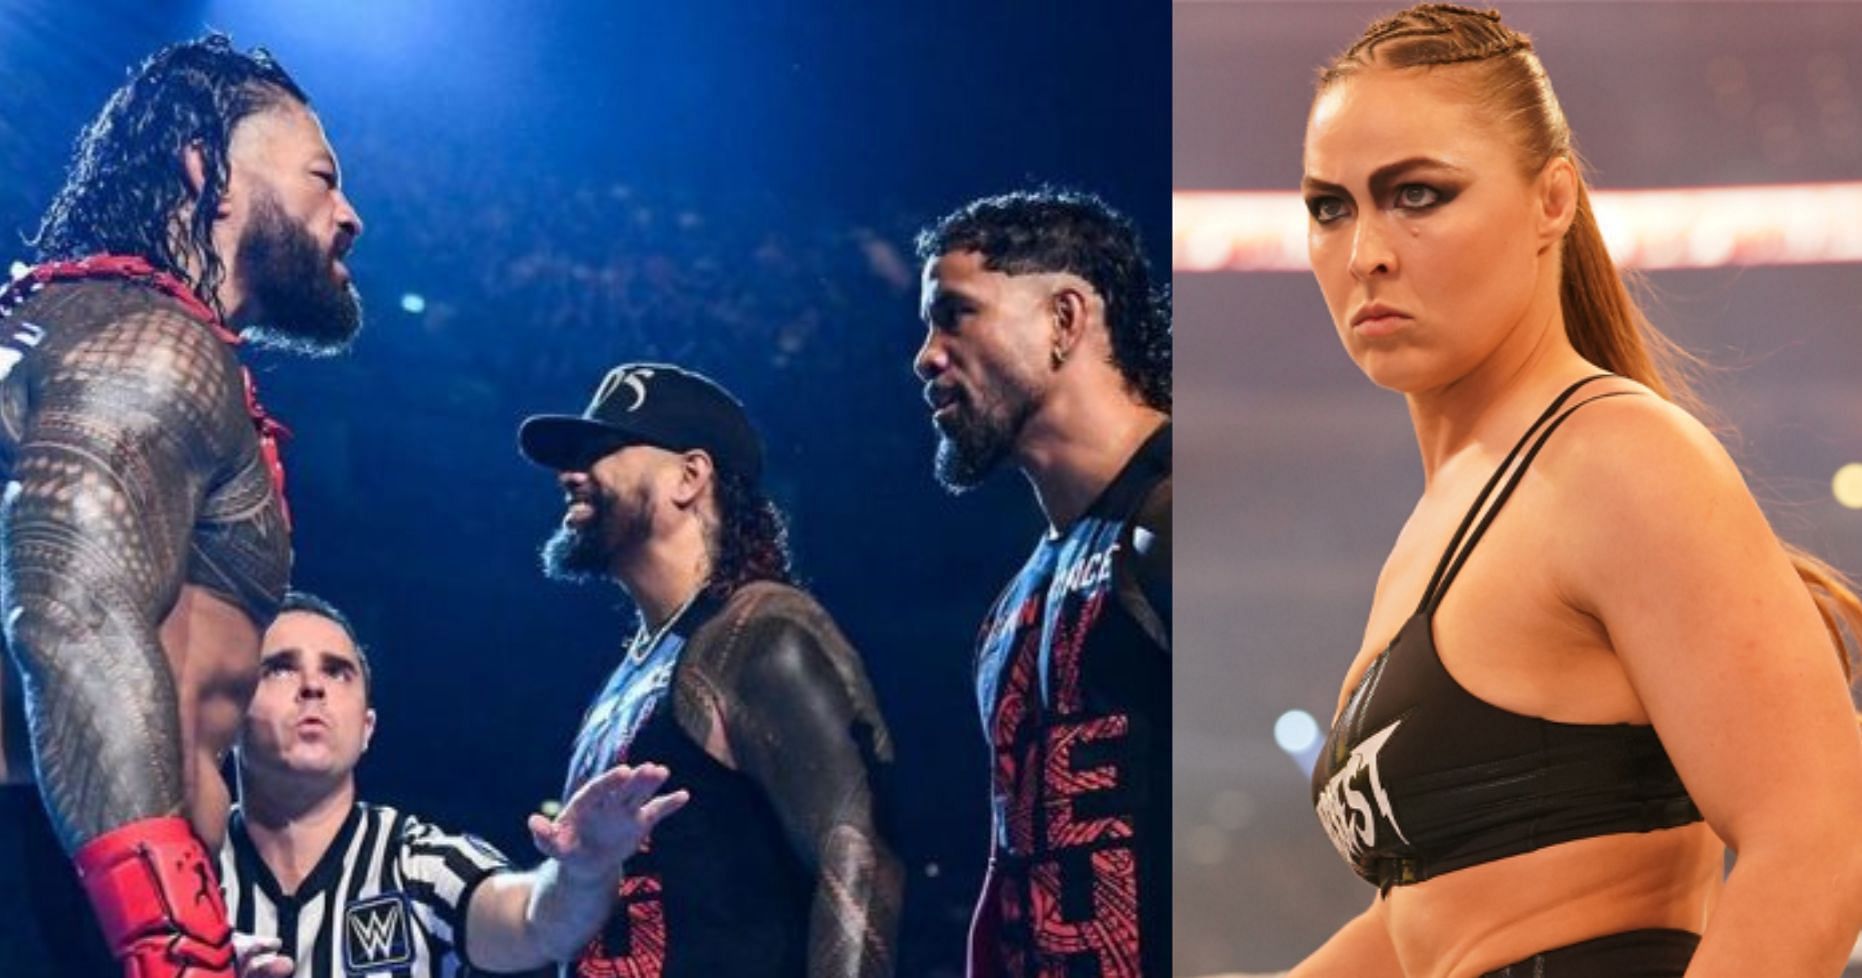 Bloodline stable (left) and Ronda Rousey (right)